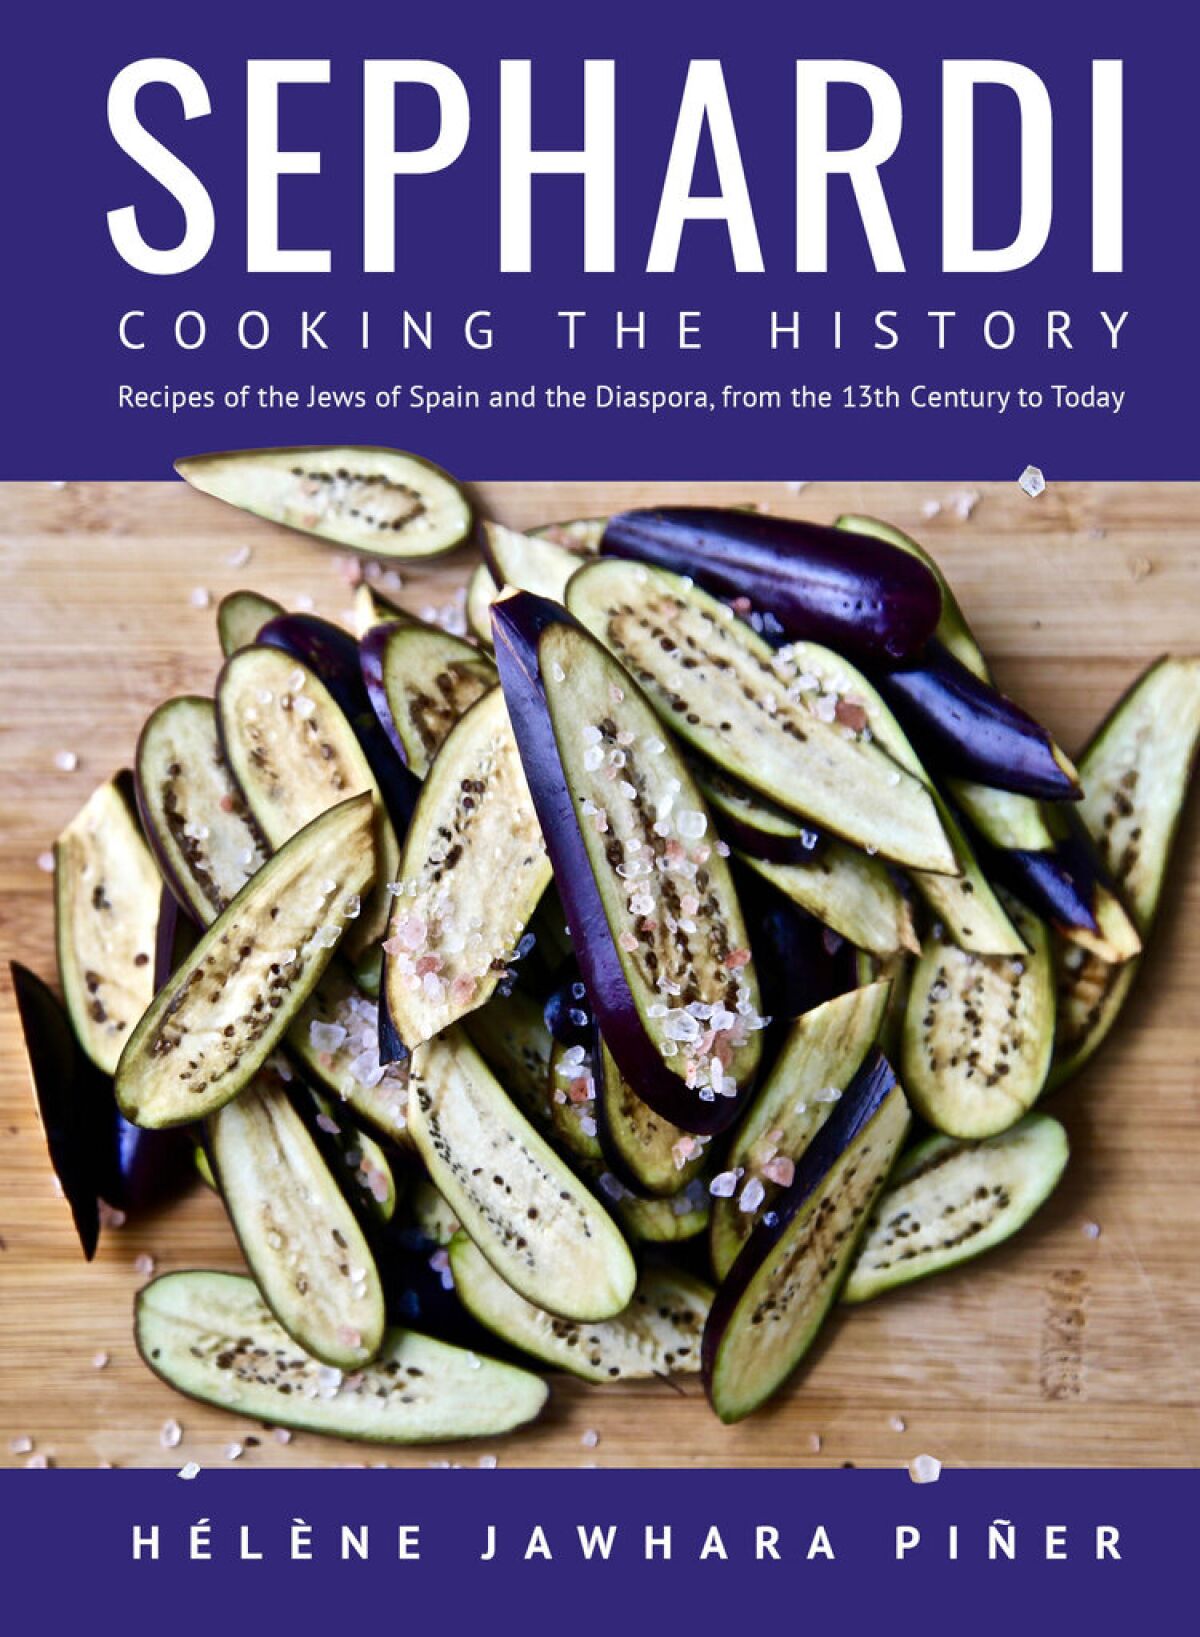 Cover of "Sephardi: Cooking the History, Recipes of the Jews of Spain and the Diaspora, From the 13th Century to Today"